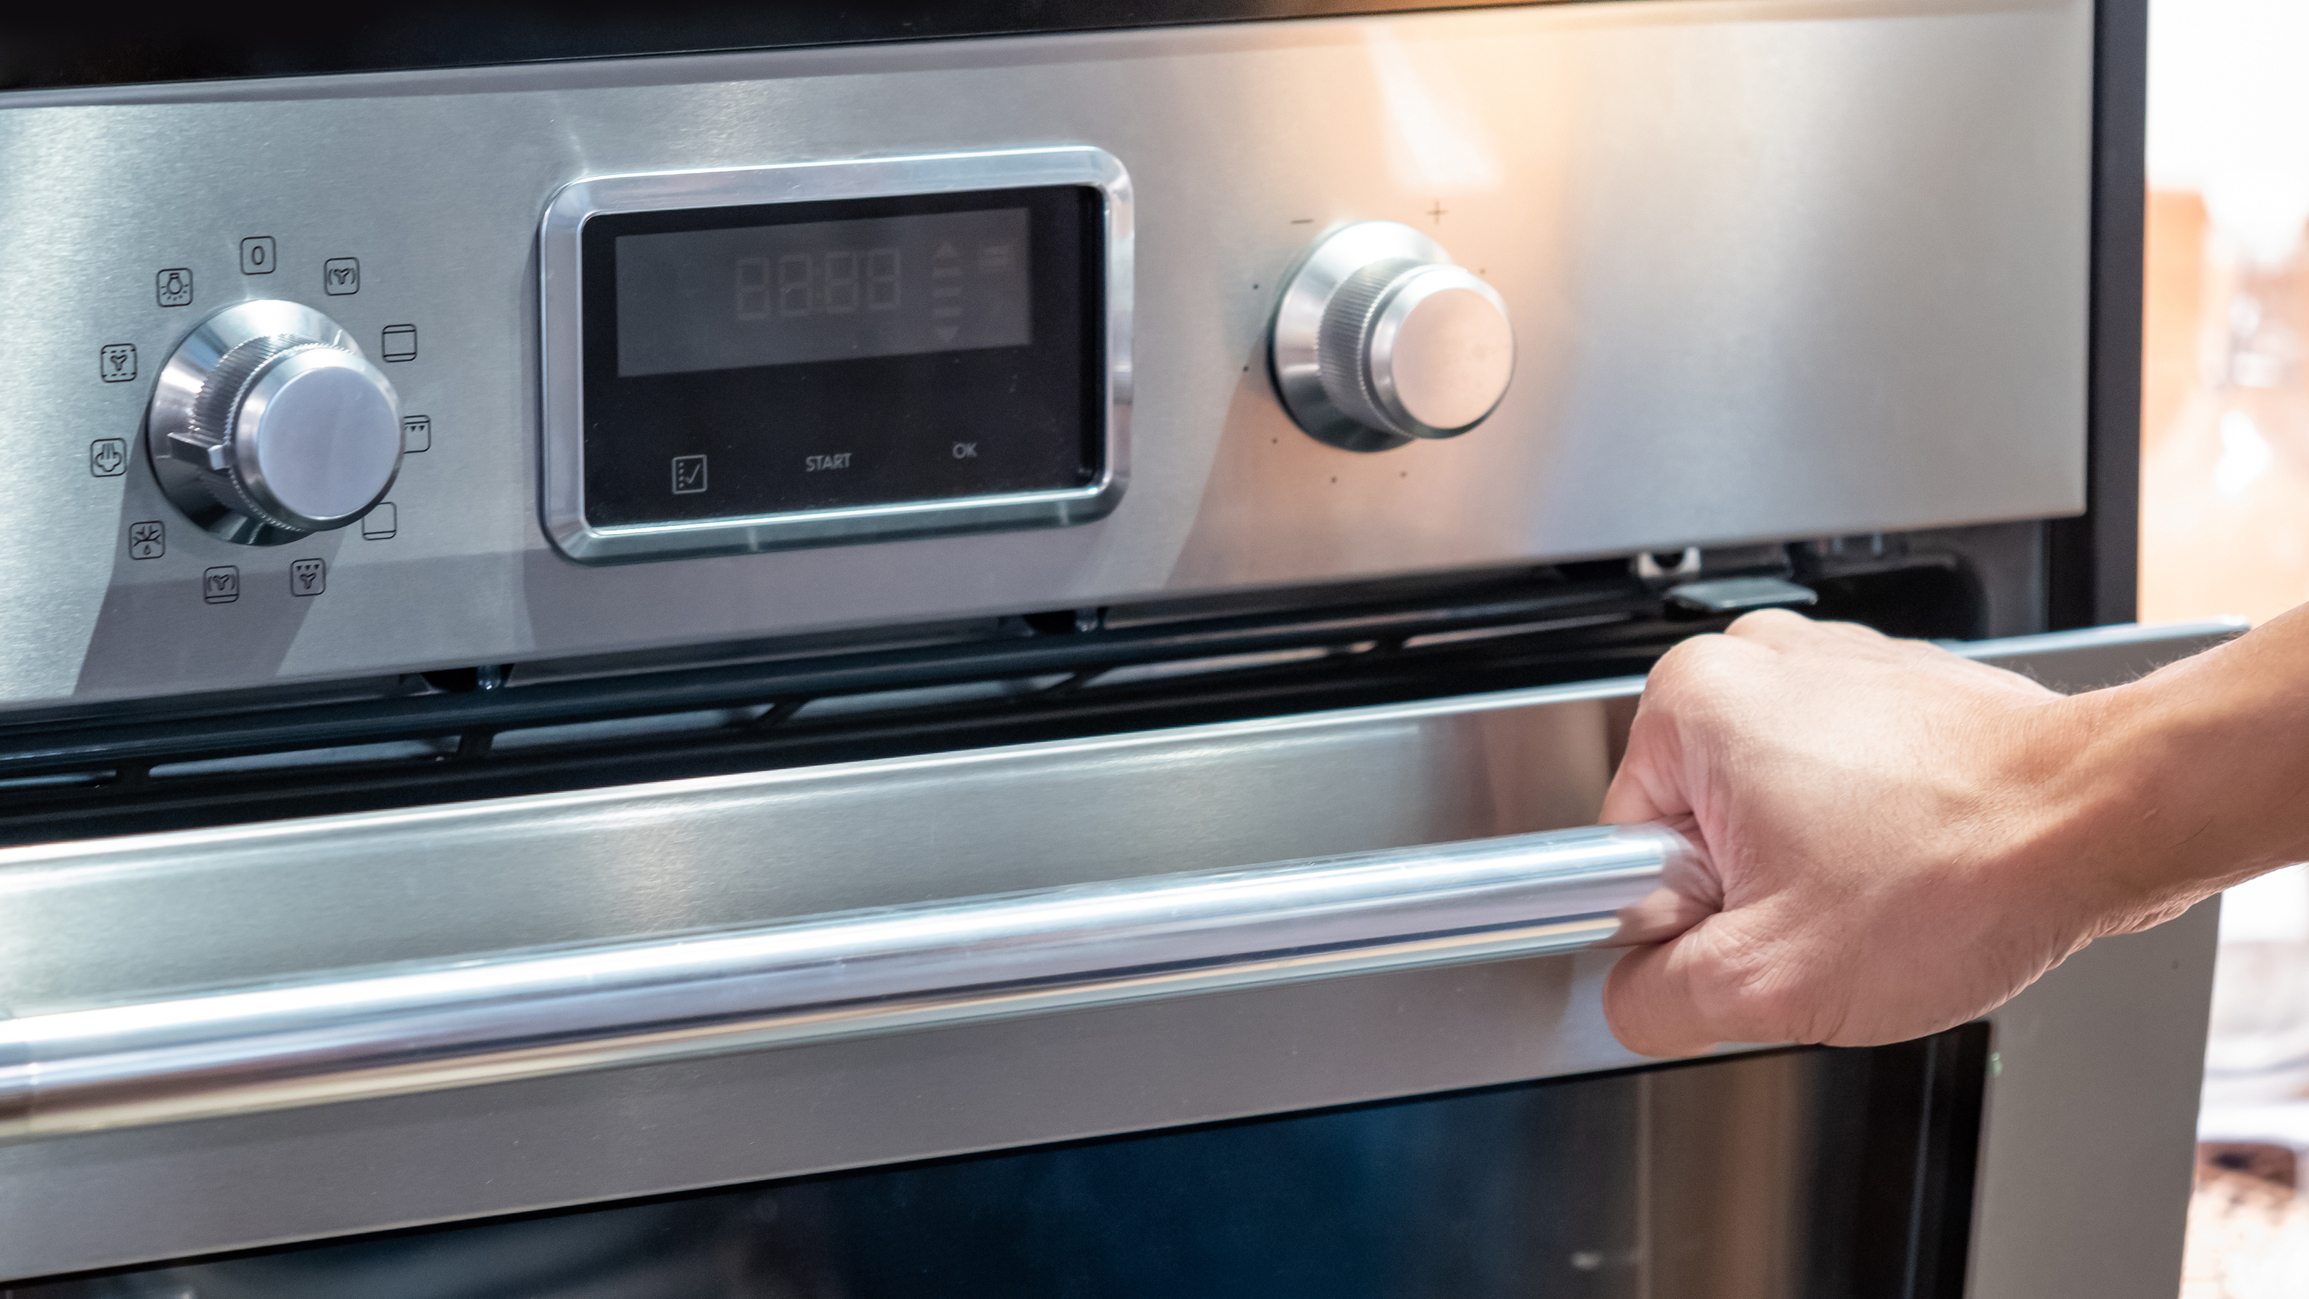 Person opening a modern oven door with digital display and control knobs